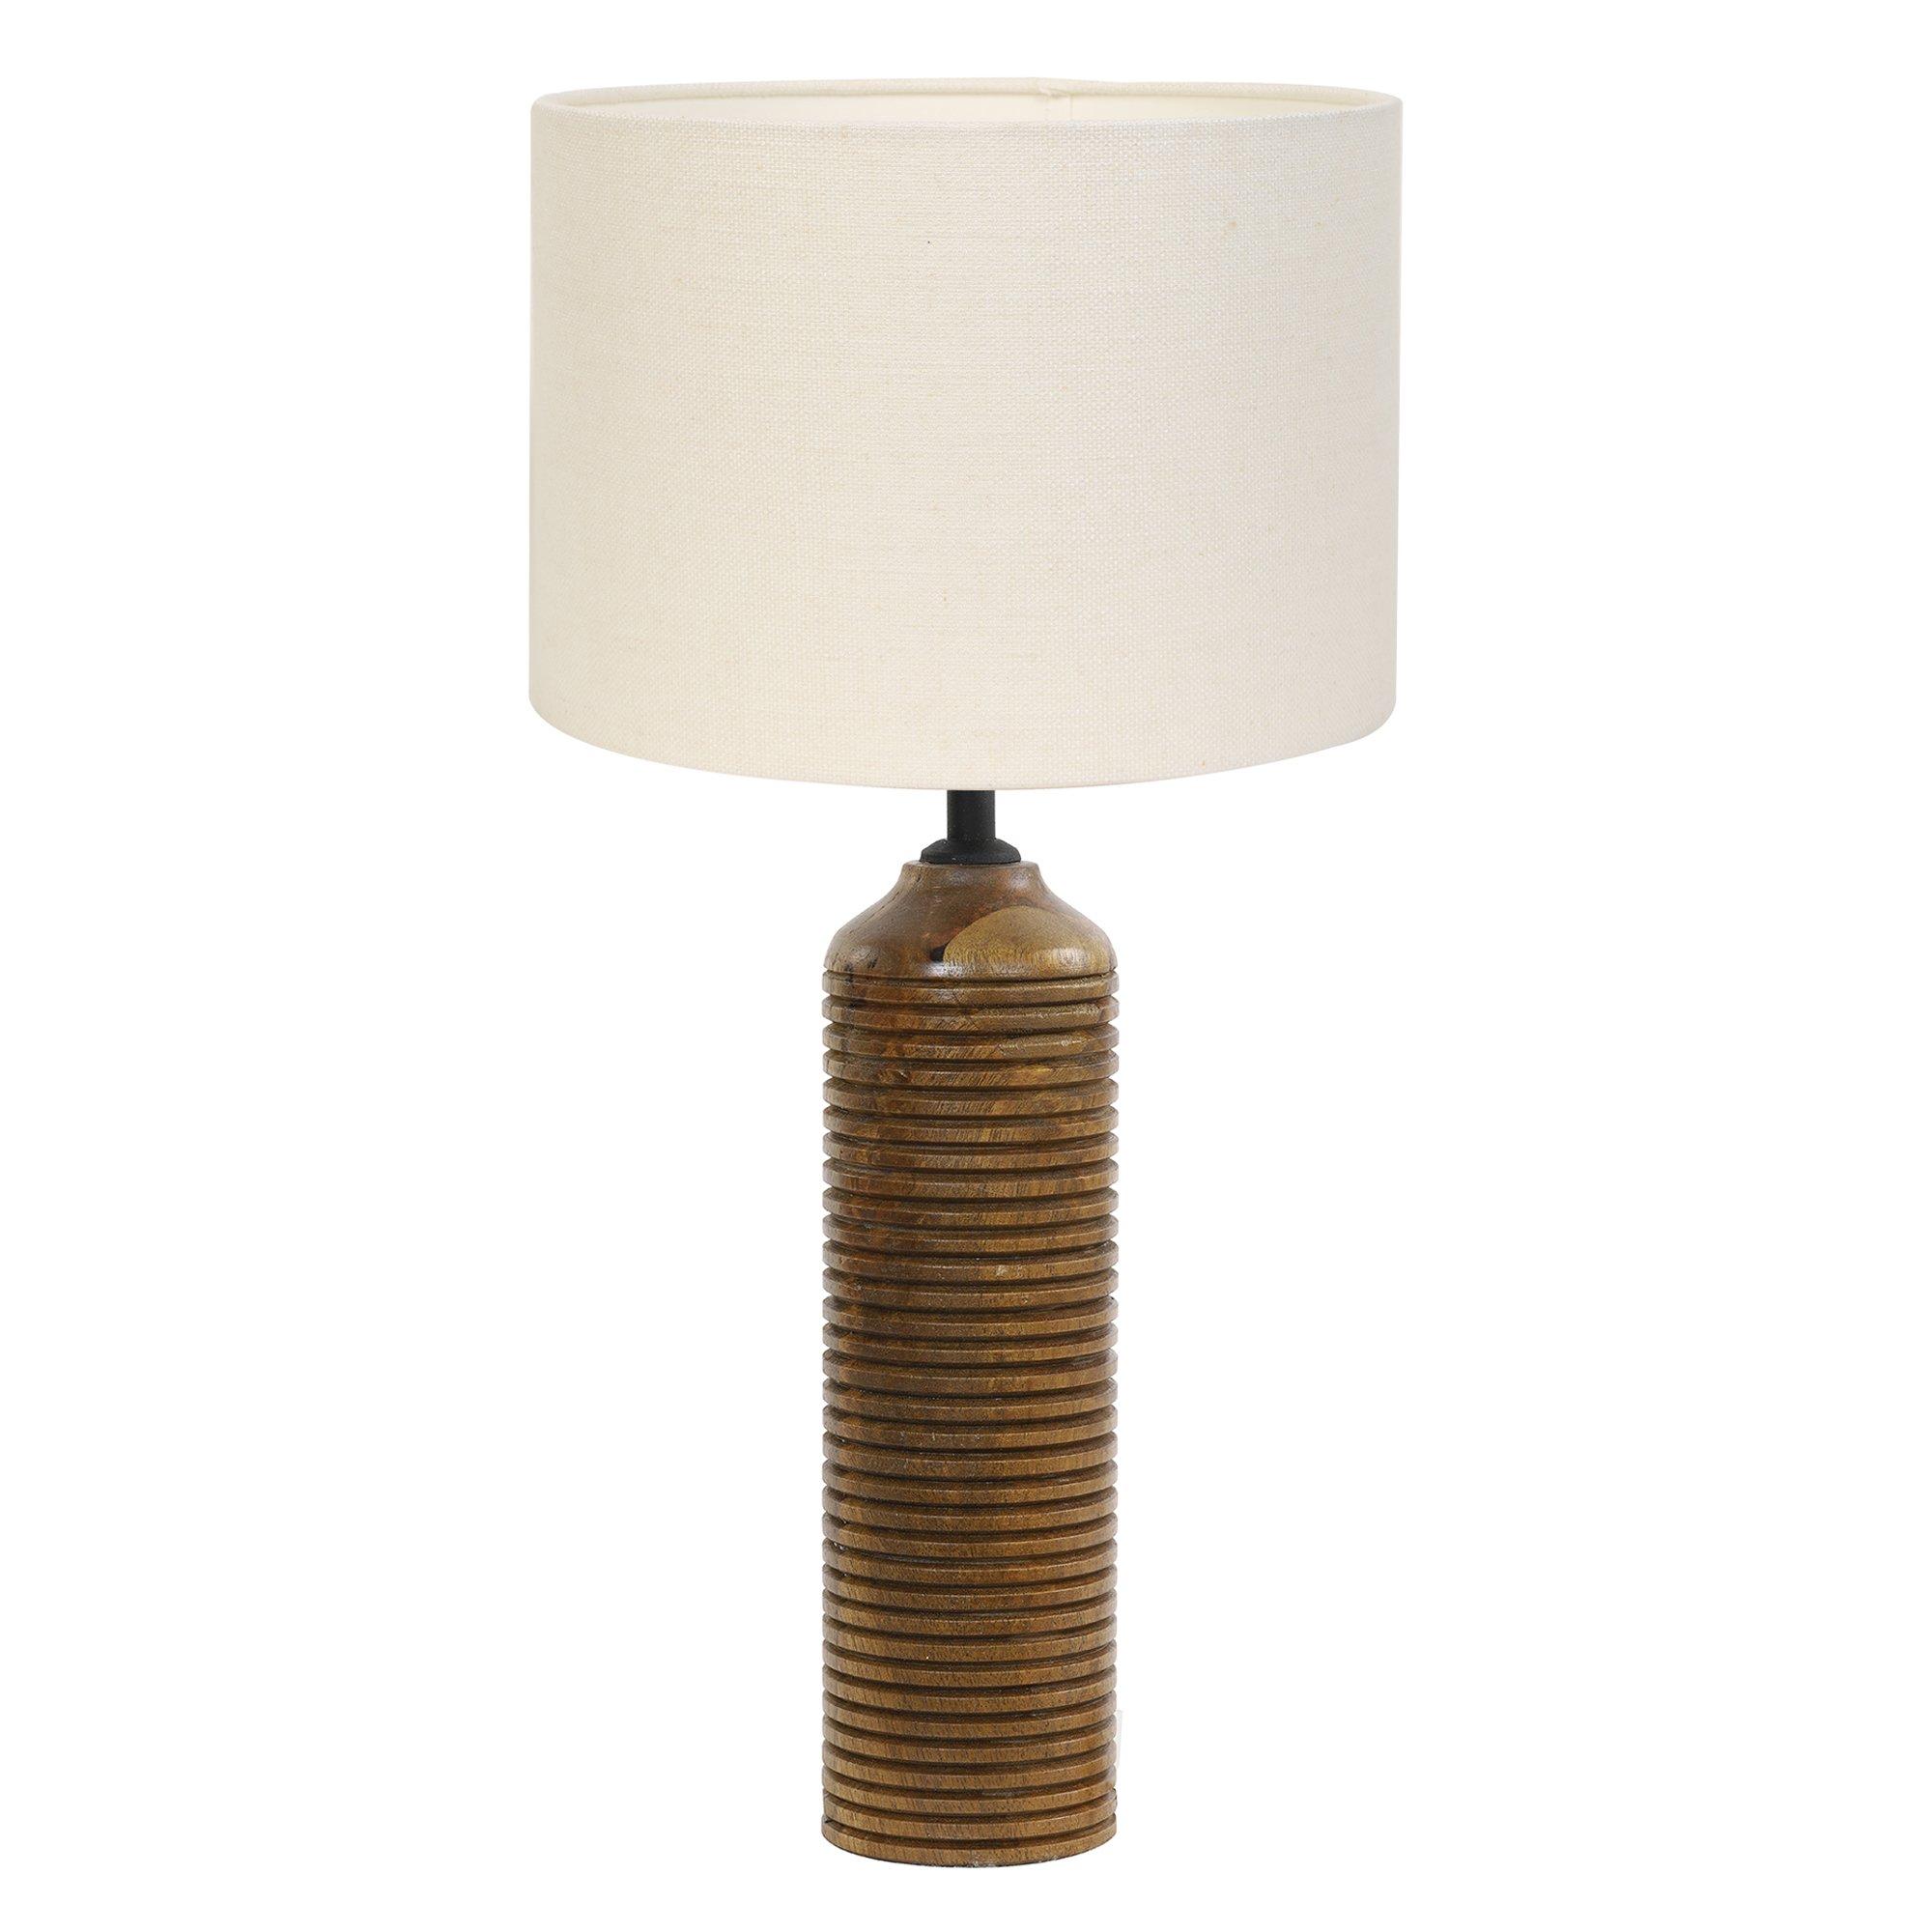 Wood Column Table Lamp, Brown | Barker & Stonehouse